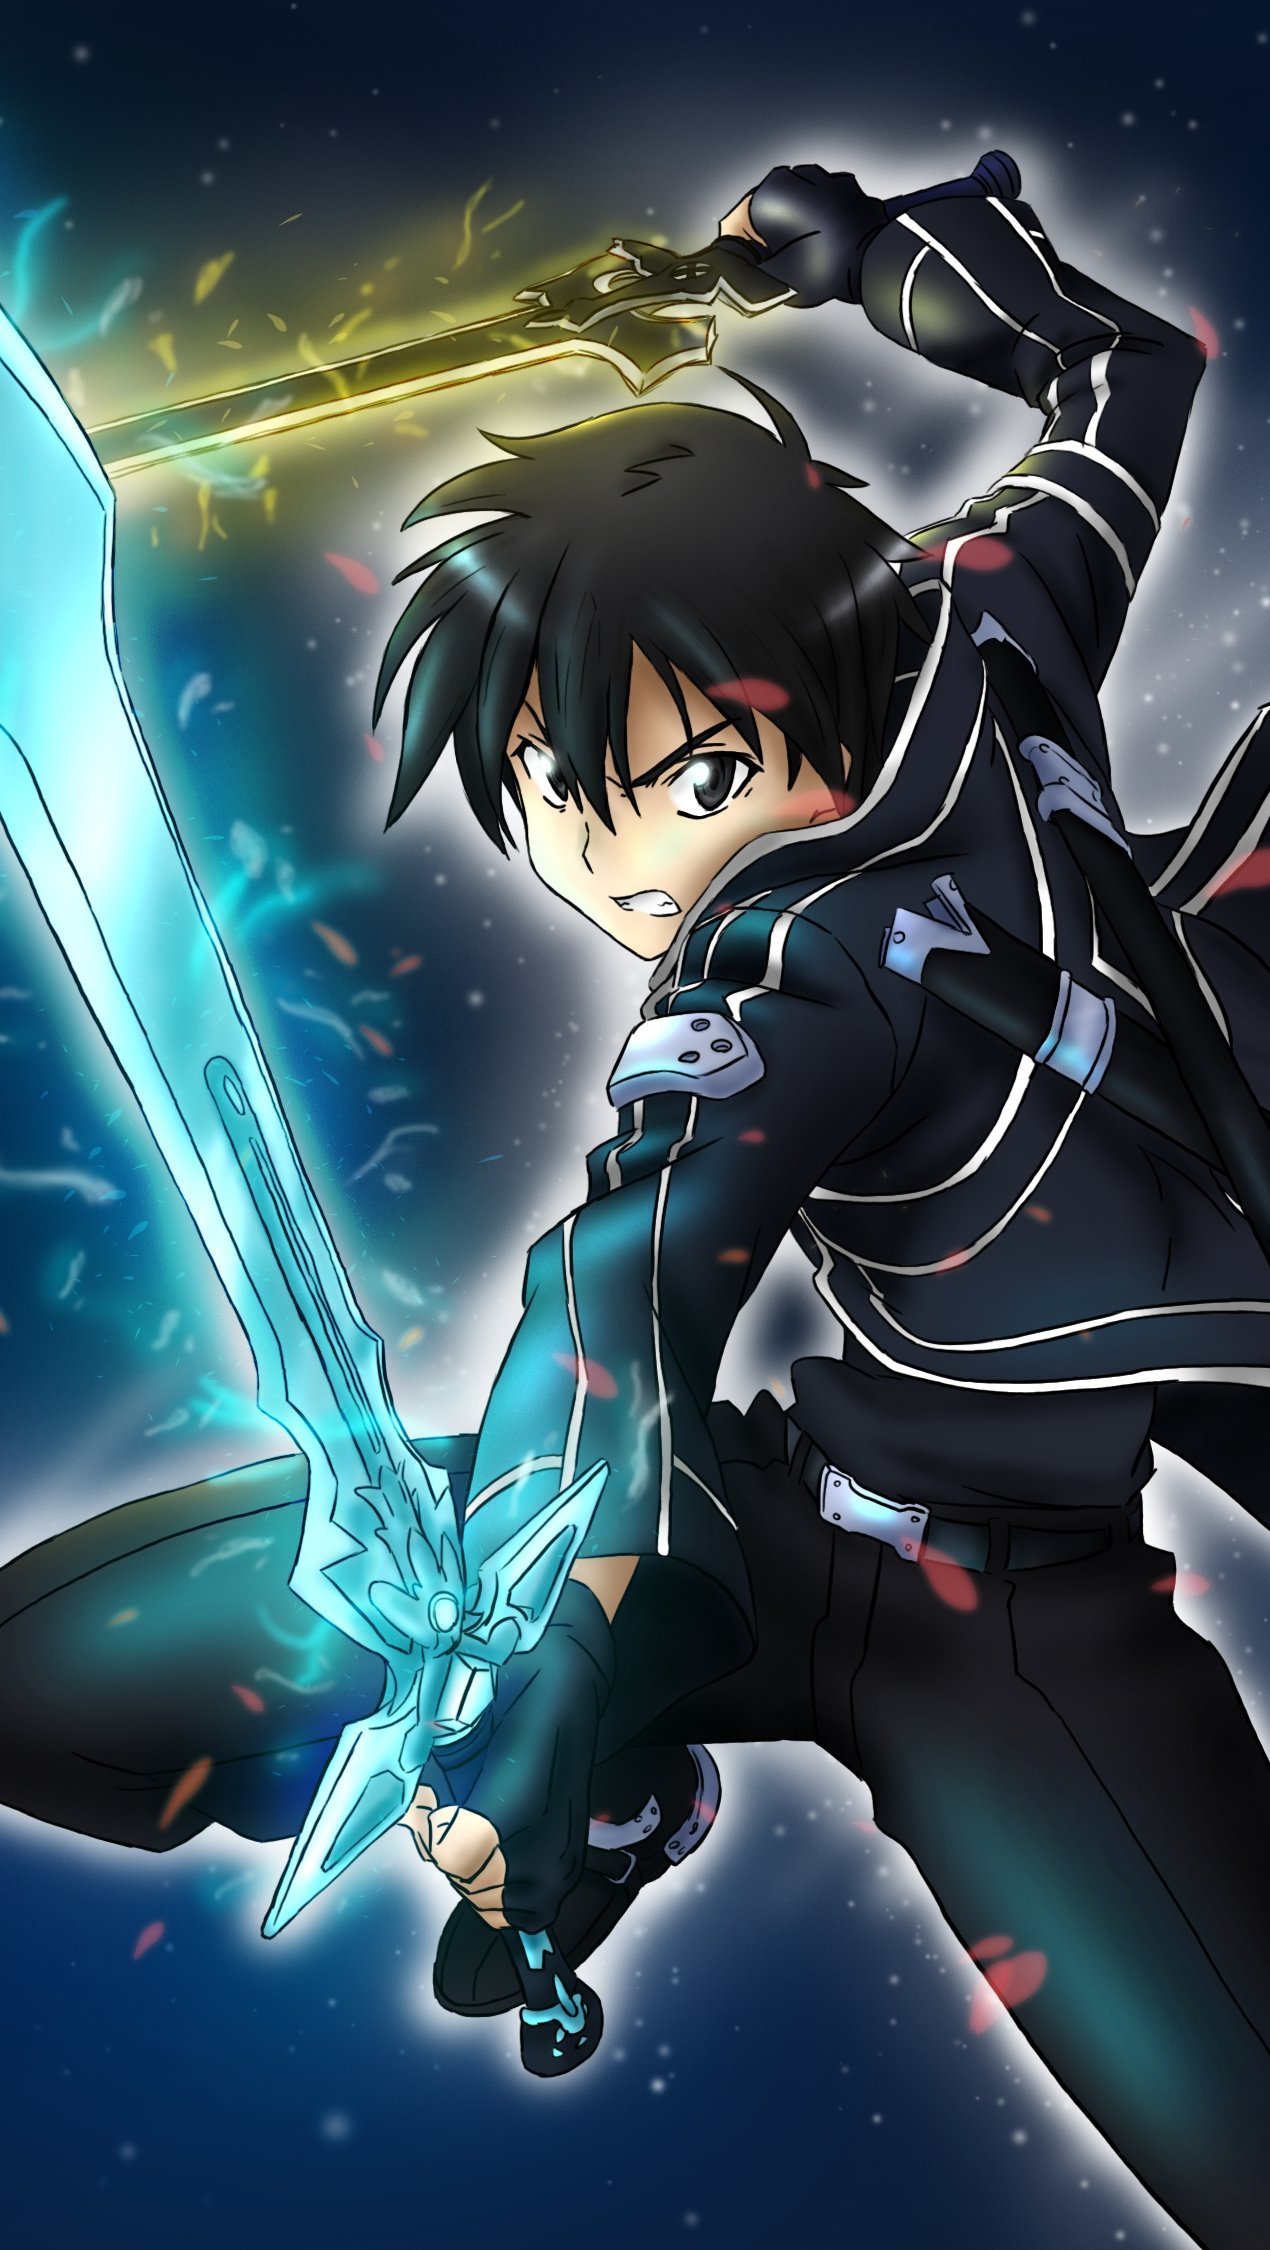 Top 10 Best Sword Art Online Wallpapers Hd Featuring Kirito Asuna and  More  HubPages